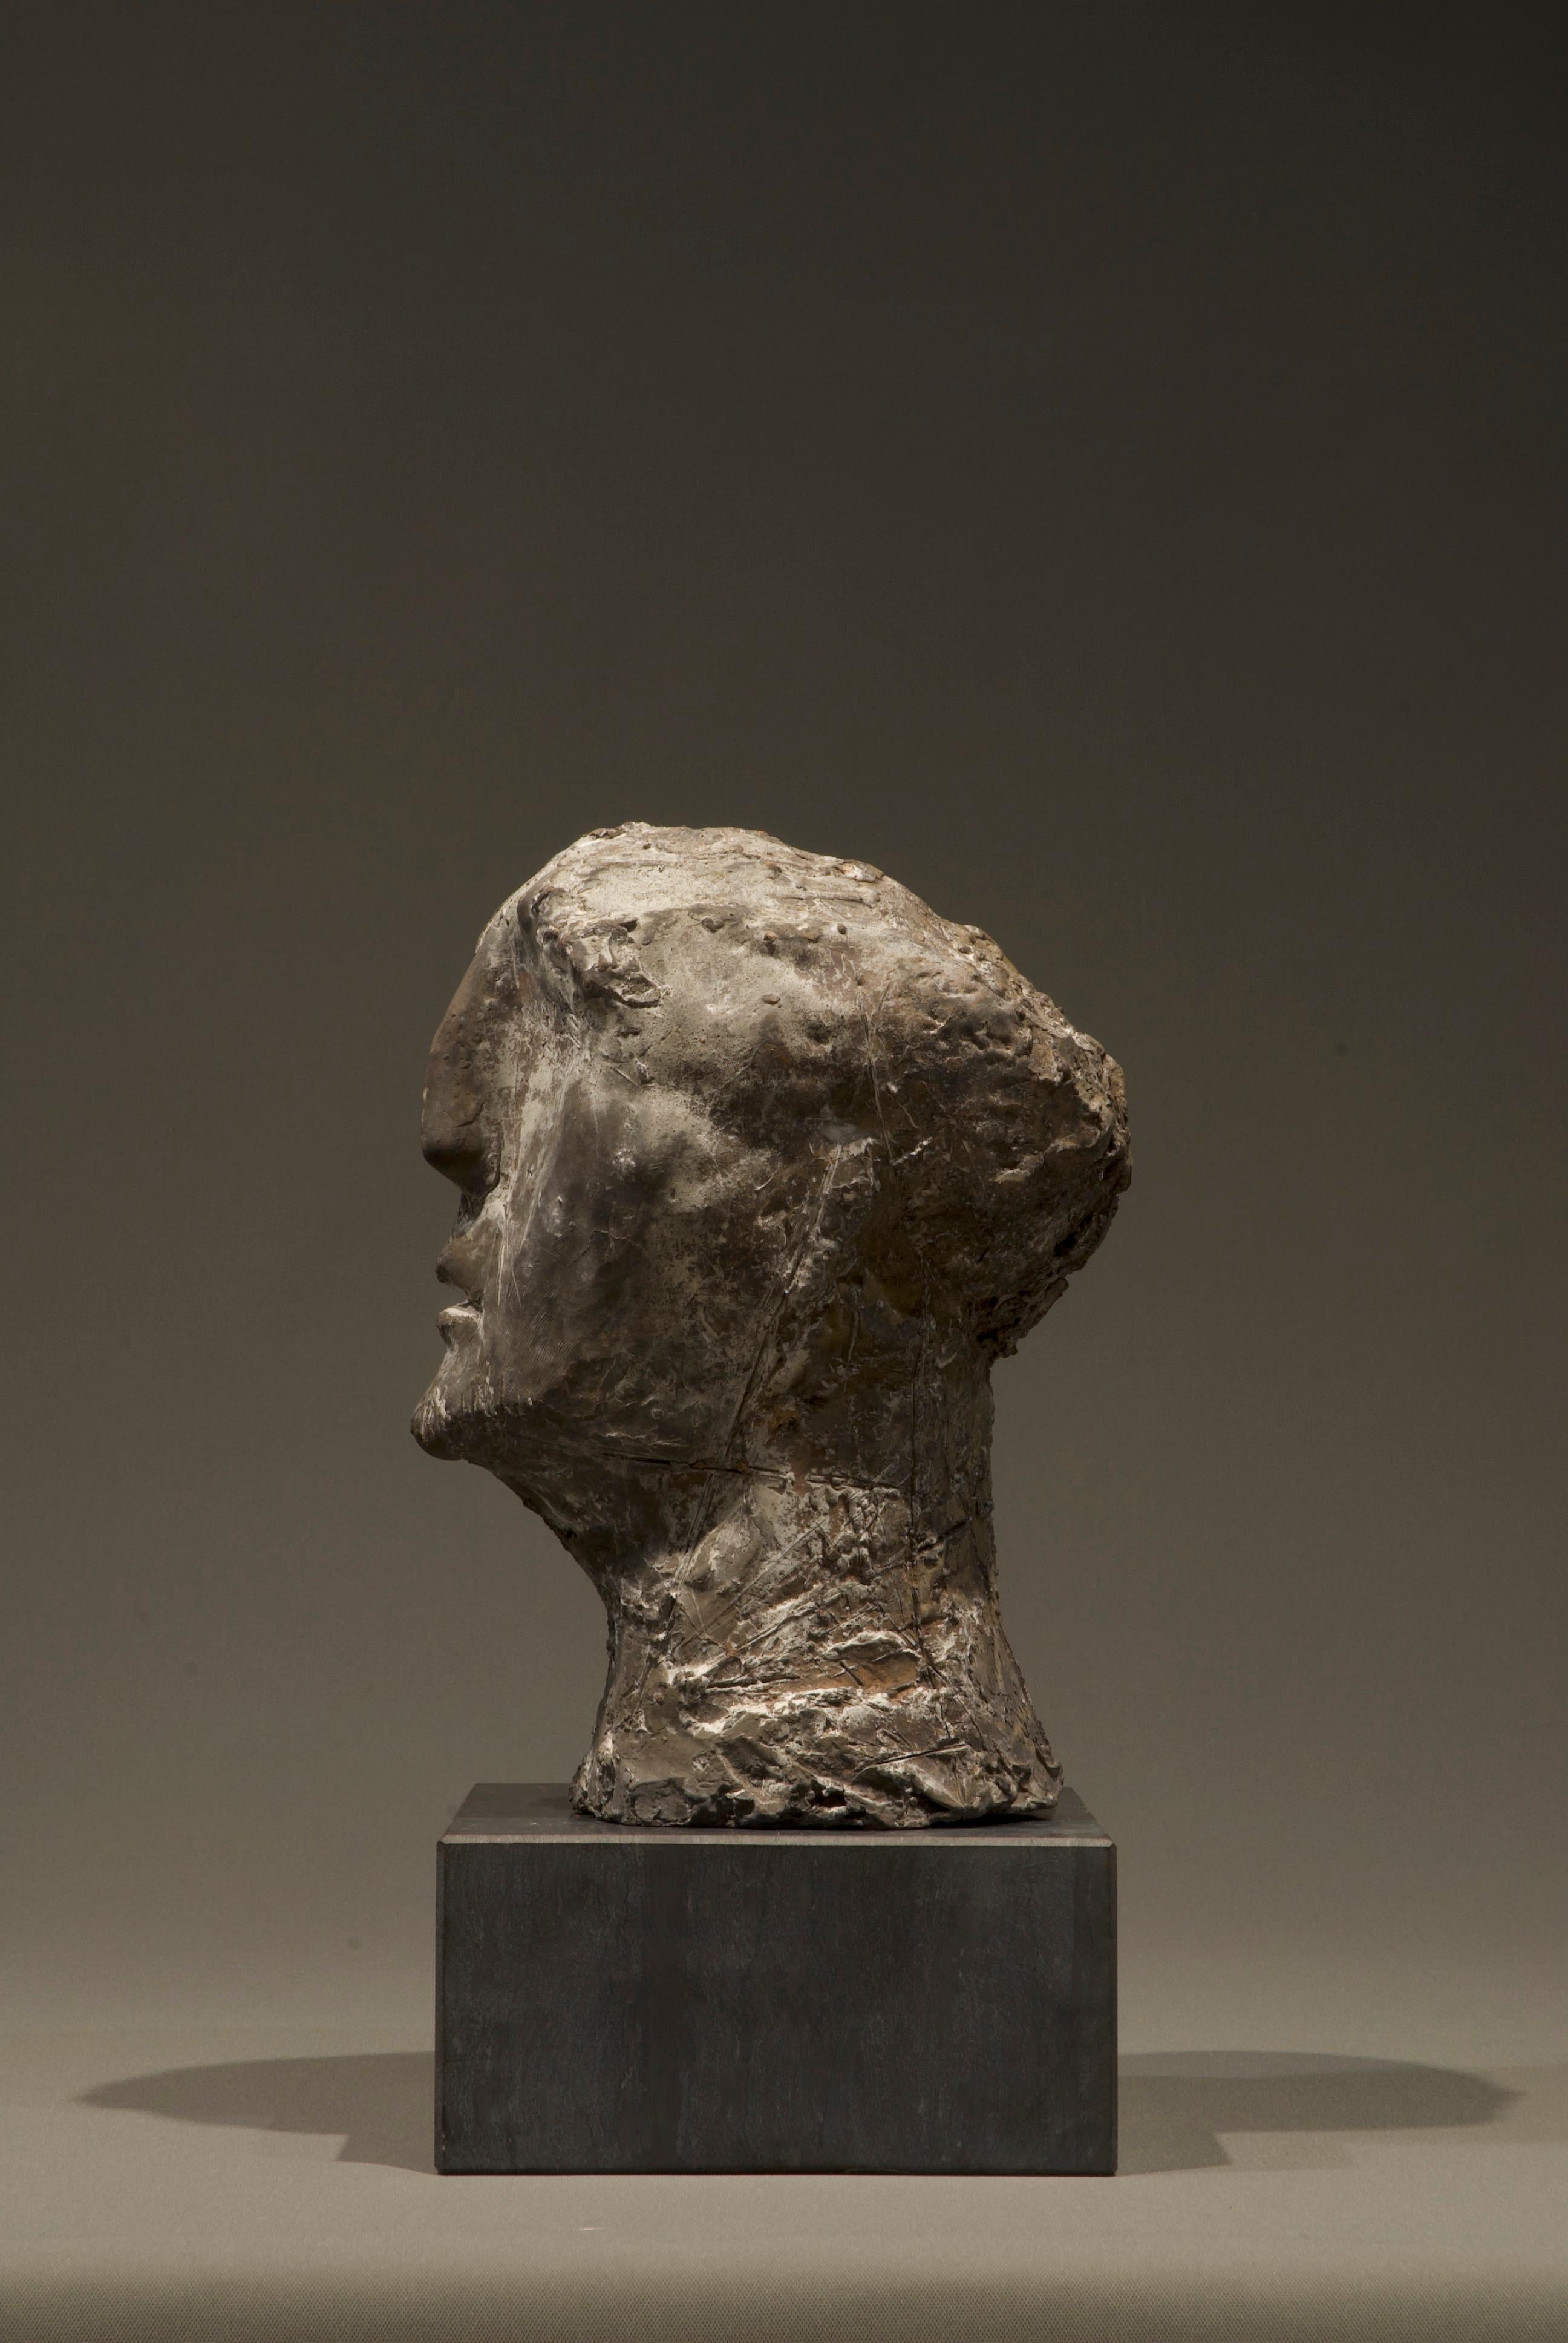 Der Seher II Bronze Sculpture Portrait Abstract Art
Junghans (1956, Recklinghausen) creates abstract sculptures in stone, wood and bronze, mostly torsos and primal portraits, in a primitive, cubic and expressionistic imagery. He also paints and